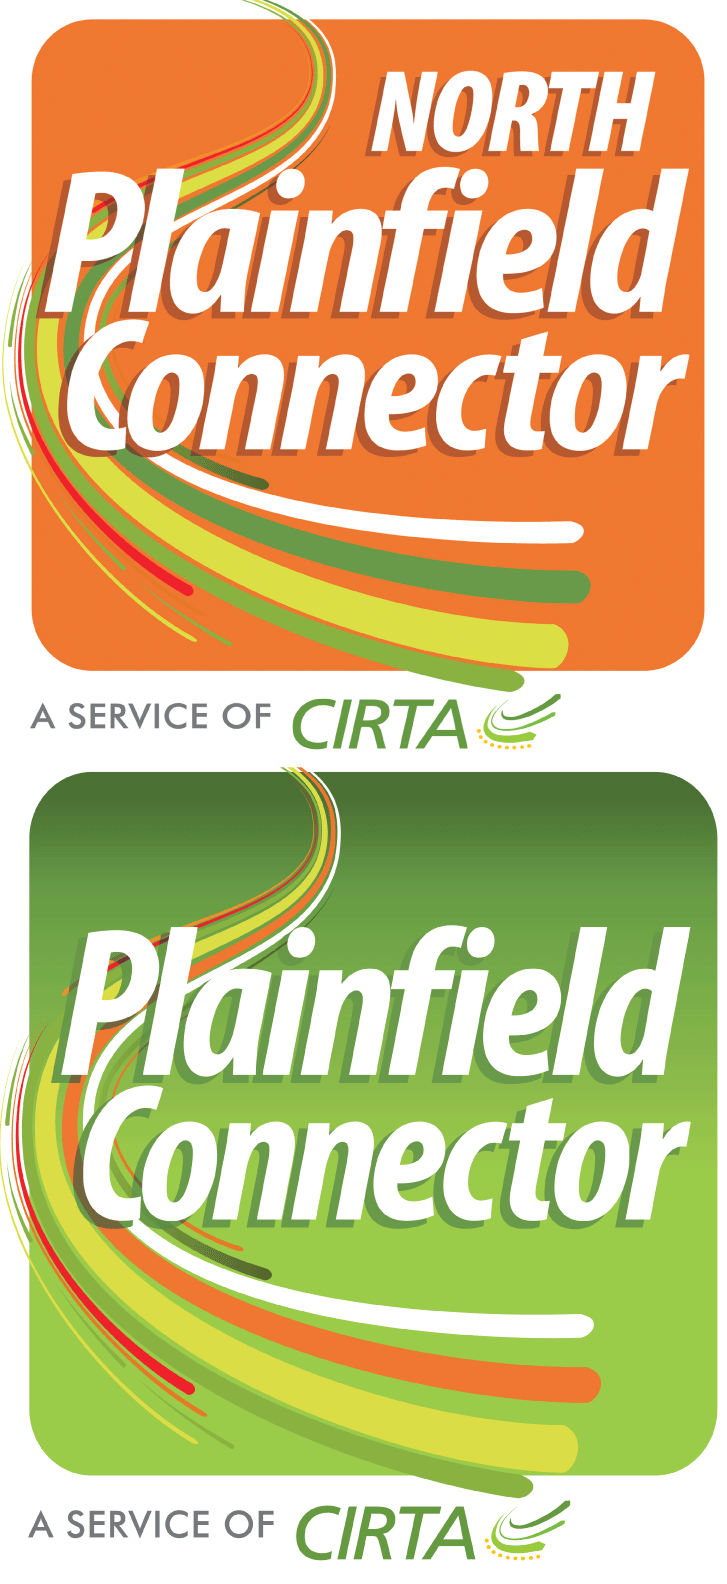 N Plainfield Connector and Plainfield Connector